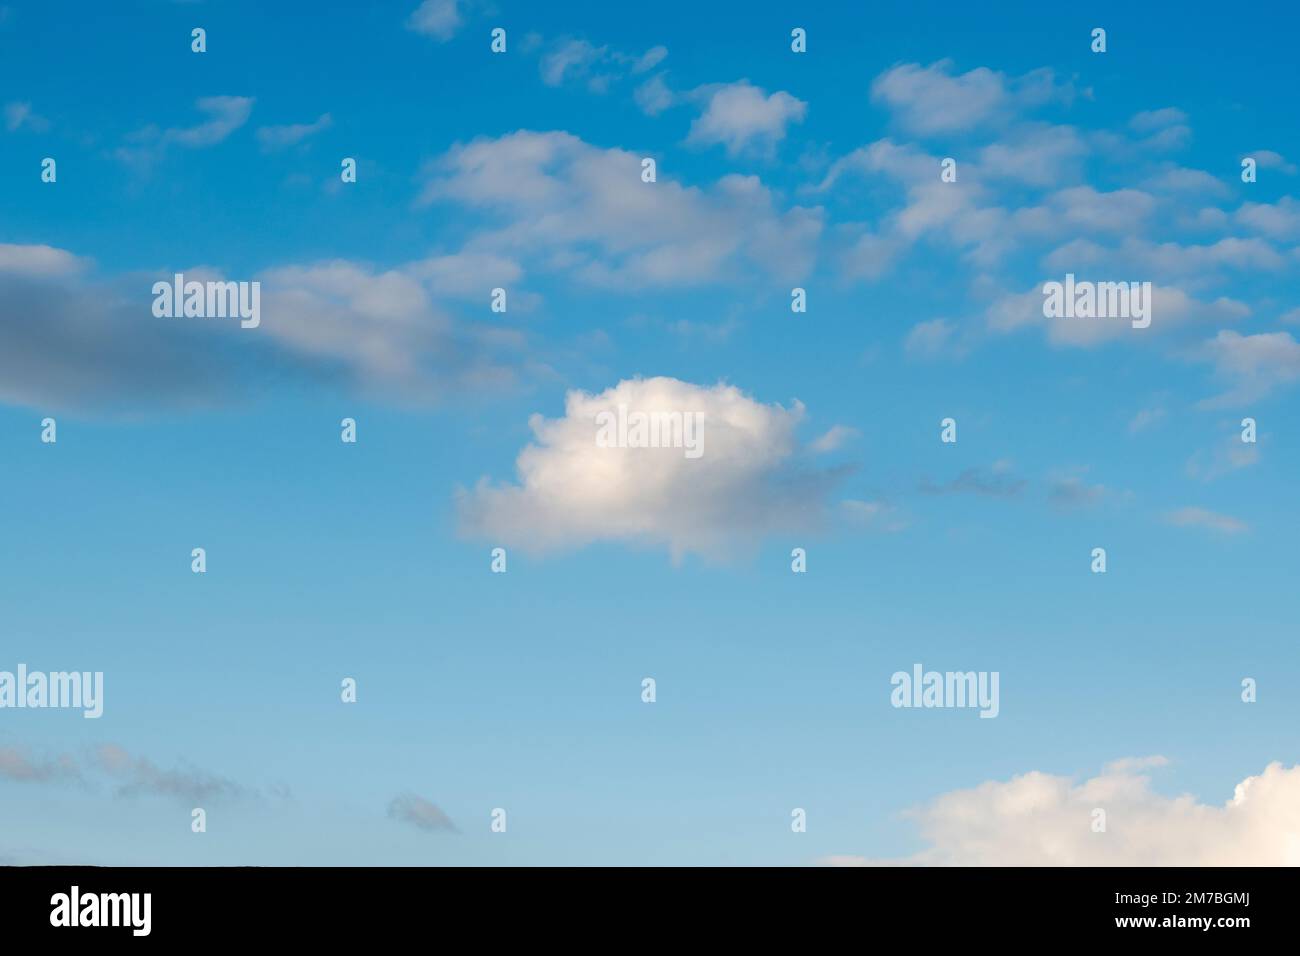 Small clouds in a blue sky Stock Photo